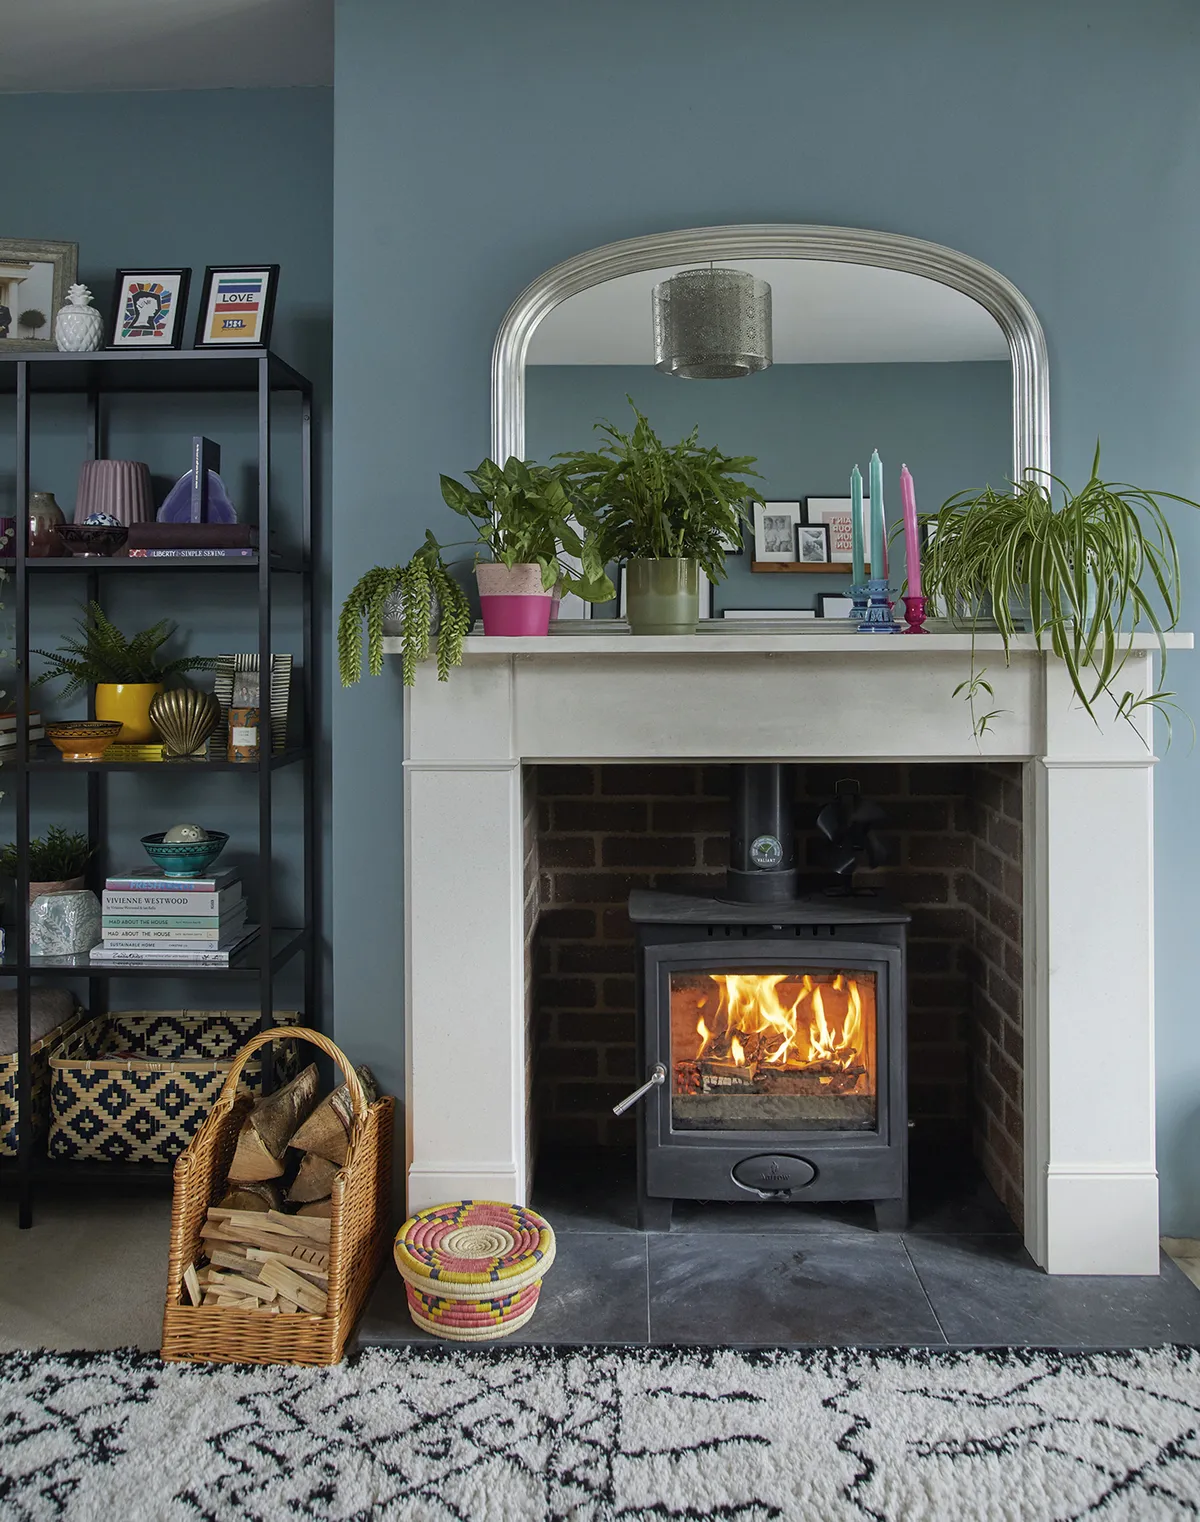 ‘I like to support local businesses where I can, so I chose this simple, classic stone surround from a place near us called Lower Barn Farm. It reminds me of the fireplace in my mum’s period property, but it also works well in this modern room’